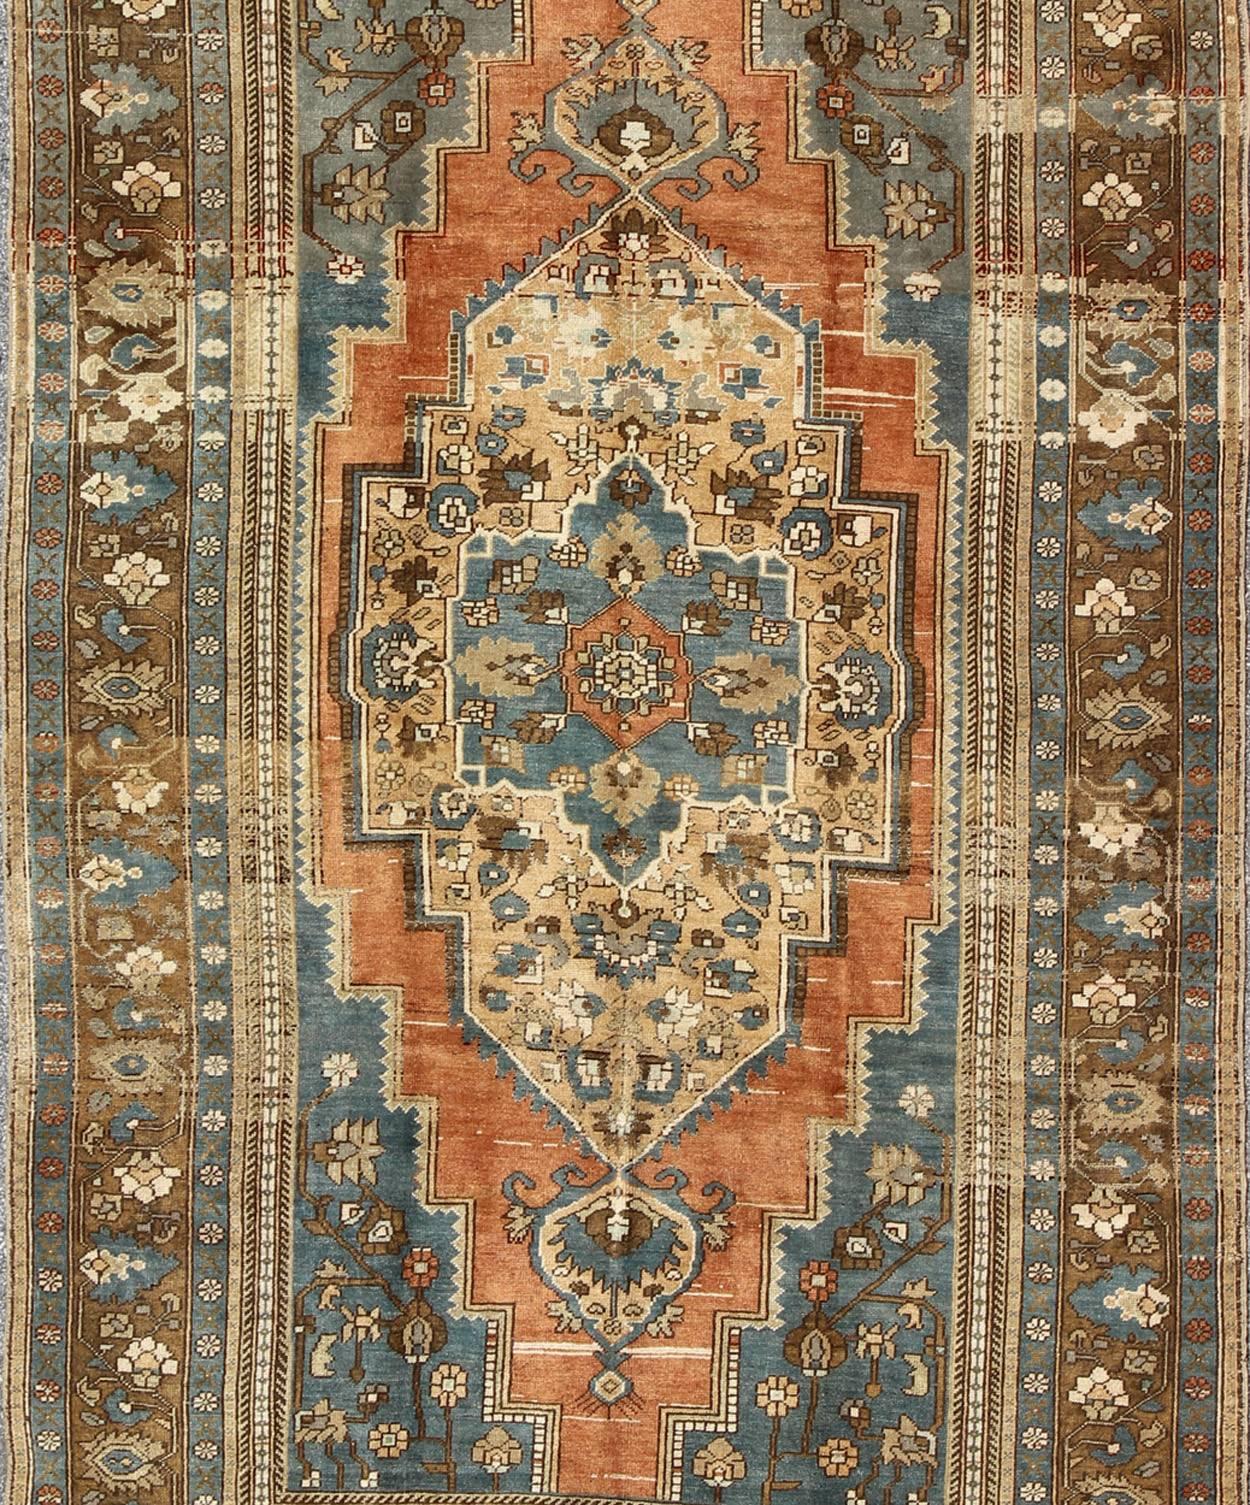 Antique Turkish Colorful Oushak Gallery Rug In Blue Brown & Terra-cotta In Good Condition For Sale In Atlanta, GA